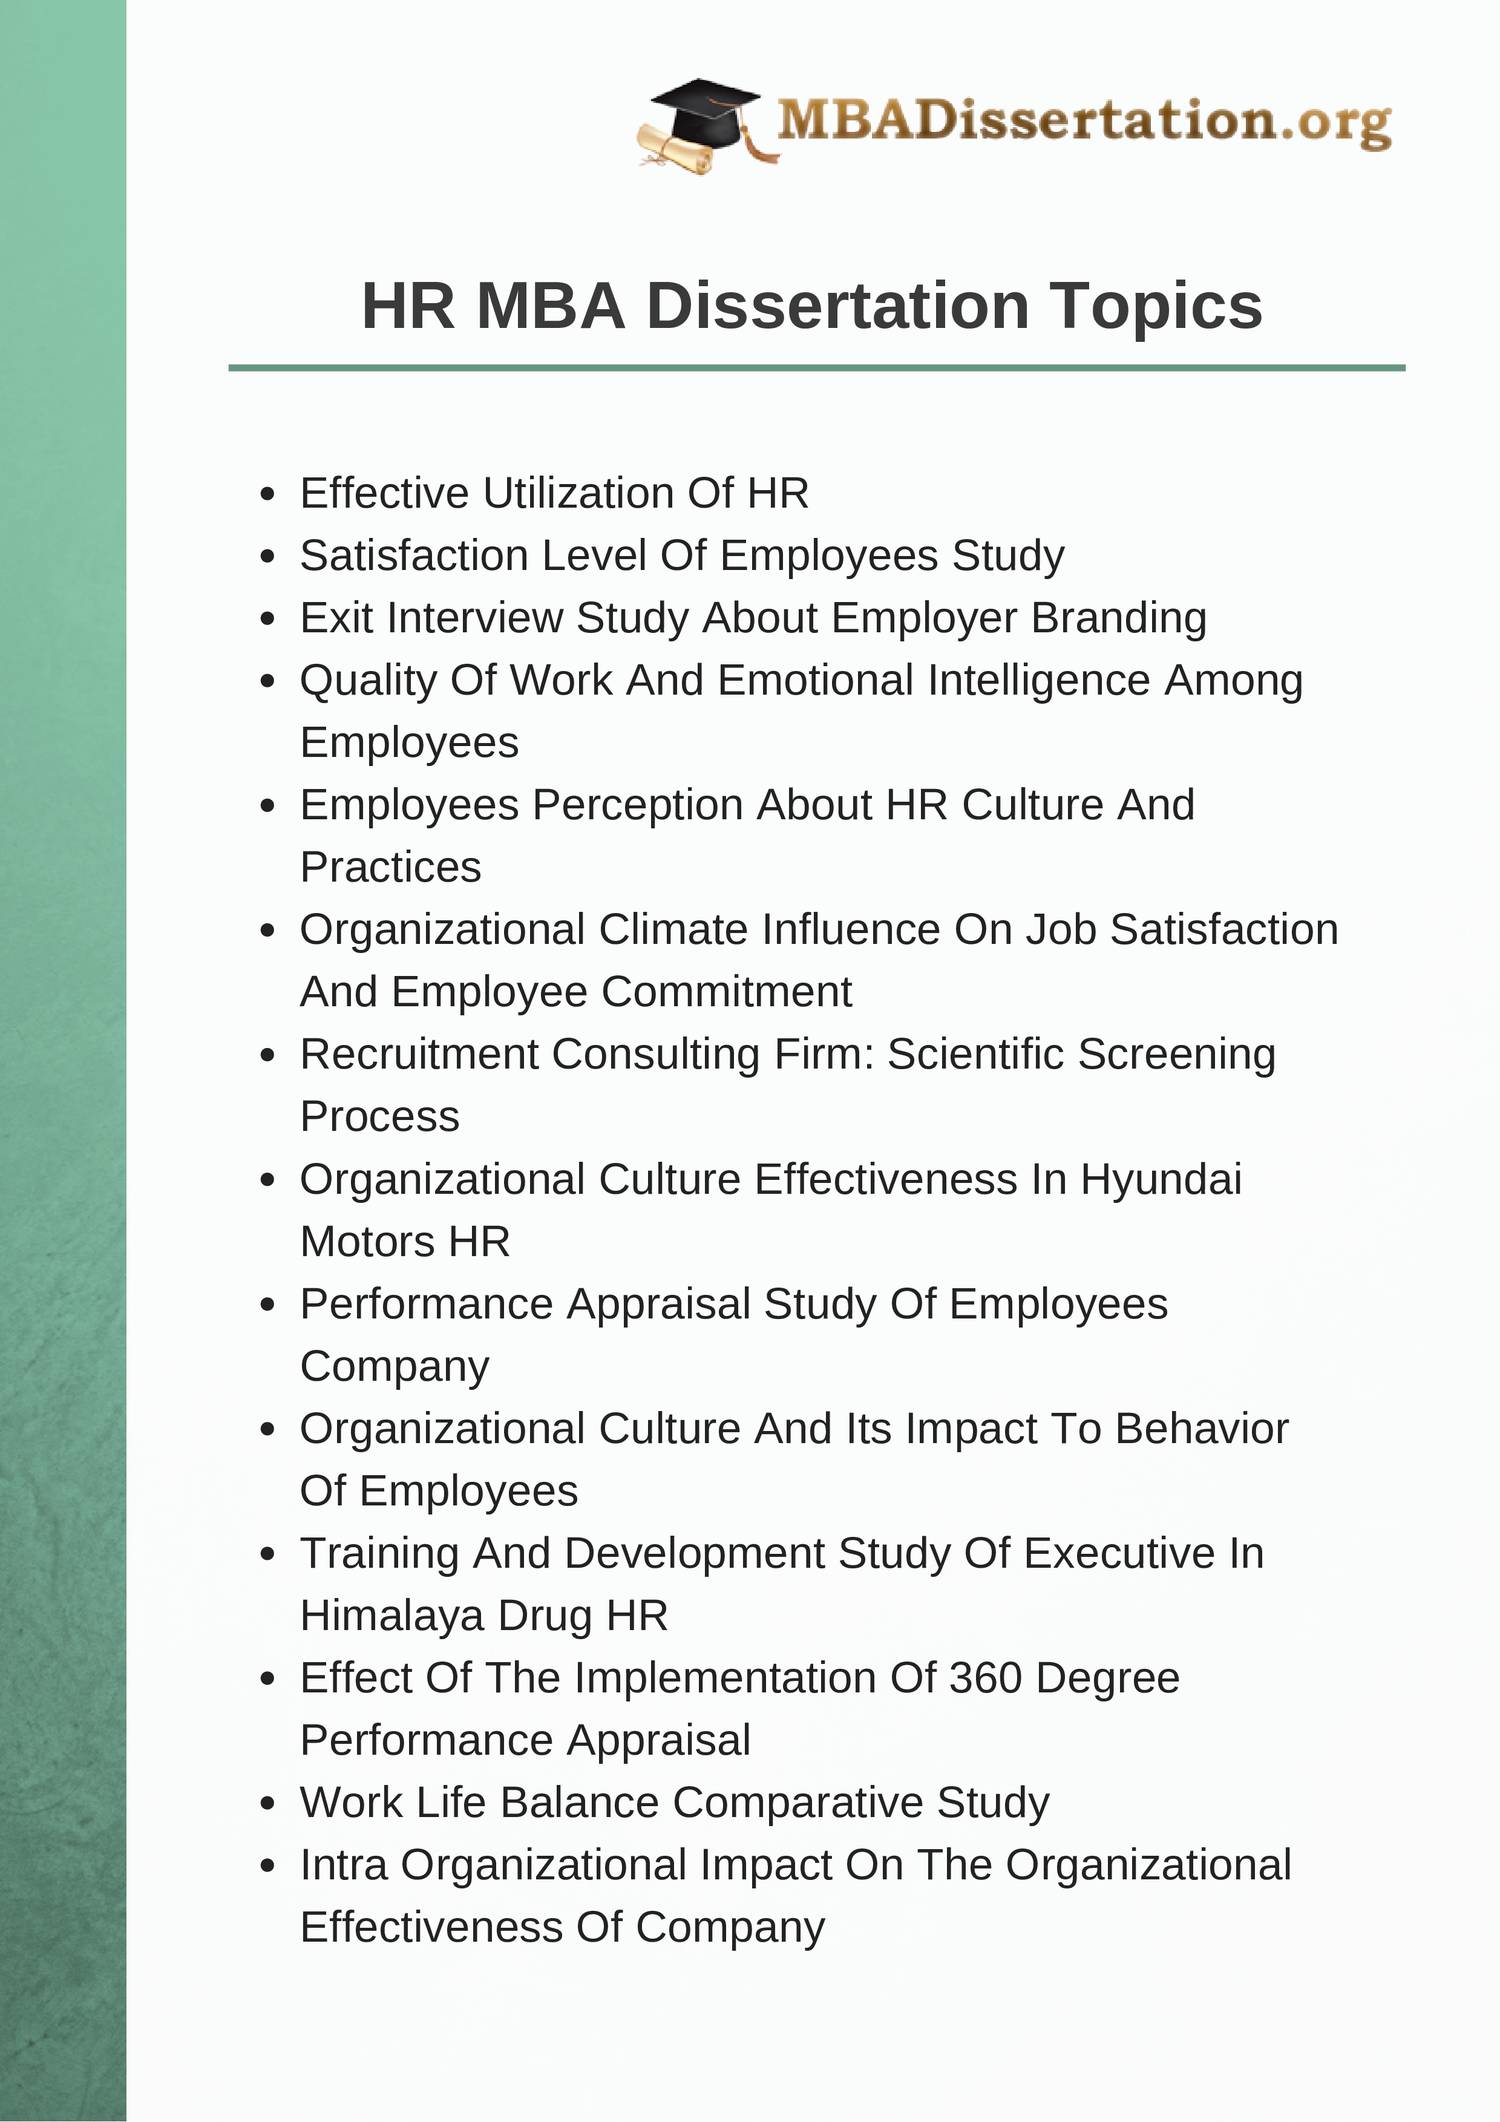 research topics for mba students in hr